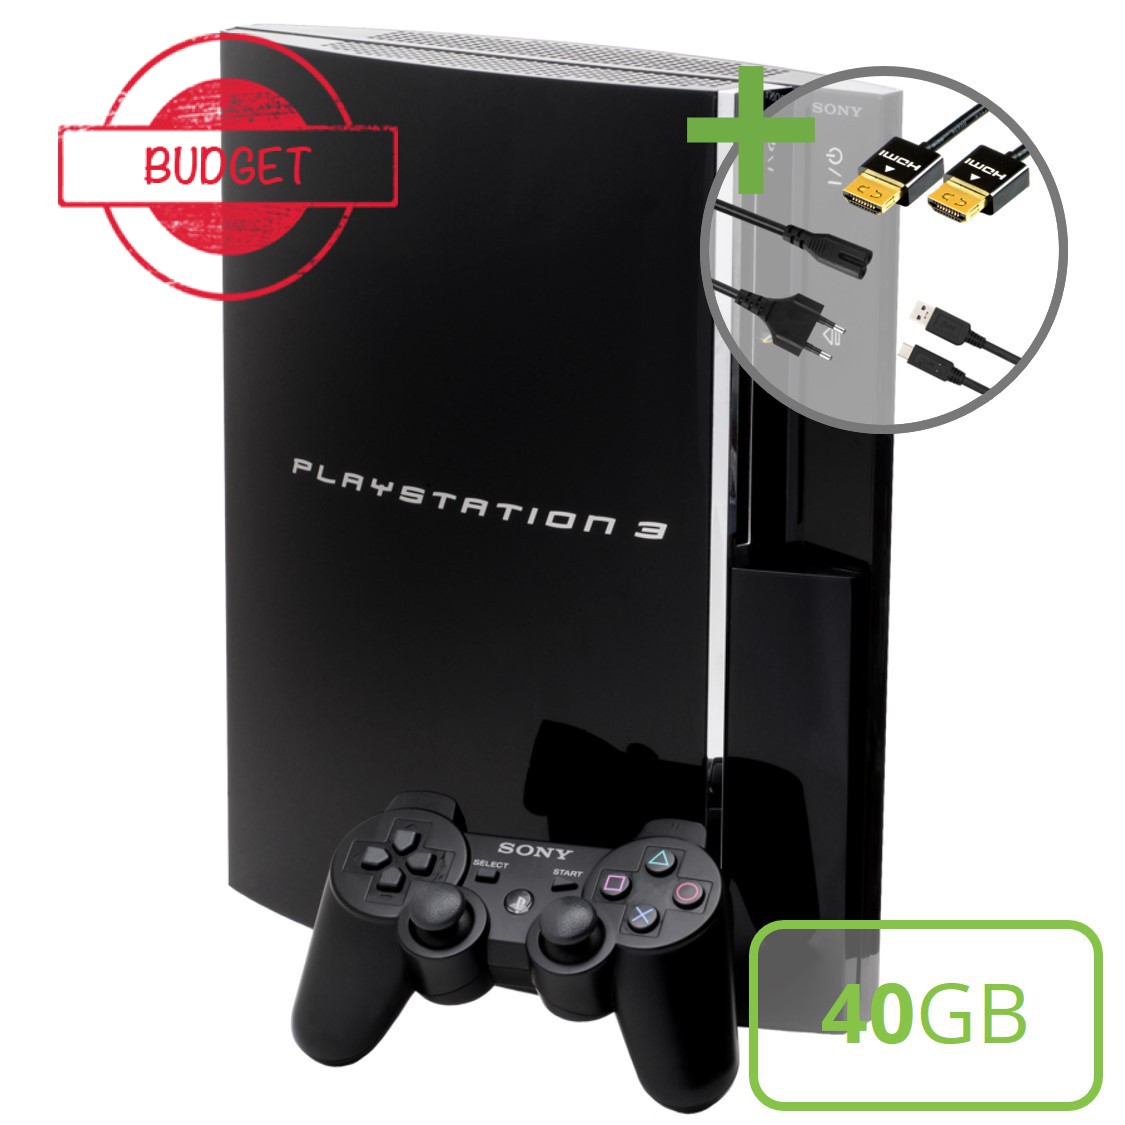 Sony PlayStation 3 Phat (40GB) Starter Pack - Sixaxis Edition - Budget - Playstation 3 Hardware - 2